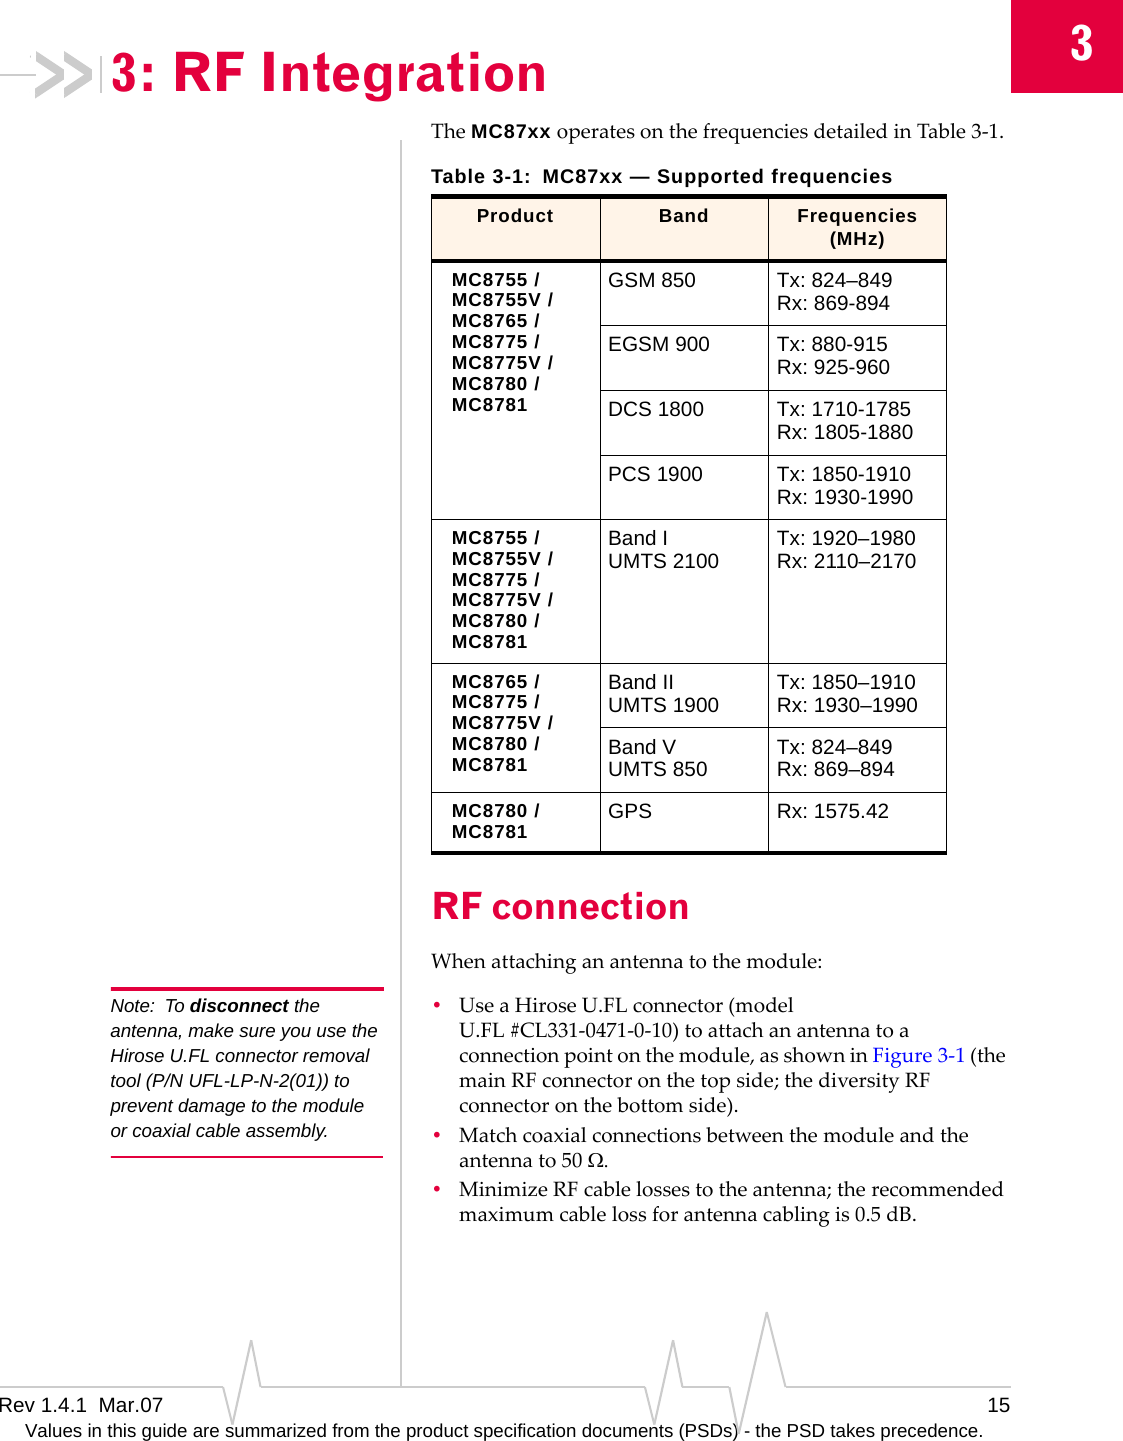 3Rev 1.4.1  Mar.07 15Values in this guide are summarized from the product specification documents (PSDs) - the PSD takes precedence.3: RF IntegrationTheMC87xxoperatesonthefrequenciesdetailedinTable3‐1.RF connectionWhenattachinganantennatothemodule:Note: To disconnect the antenna, make sure you use the Hirose U.FL connector removal tool (P/N UFL-LP-N-2(01)) to prevent damage to the module or coaxial cable assembly.•UseaHiroseU.FLconnector(modelU.FL#CL331‐0471‐0‐10)toattachanantennatoaconnectionpointonthemodule,asshowninFigure3‐1(themainRFconnectoronthetopside;thediversityRFconnectoronthebottomside).•Matchcoaxialconnectionsbetweenthemoduleandtheantennato50Ω.•MinimizeRFcablelossestotheantenna;therecommendedmaximumcablelossforantennacablingis0.5dB.Table 3-1: MC87xx — Supported frequenciesProduct Band Frequencies (MHz)MC8755 /MC8755V /MC8765 /MC8775 /MC8775V /MC8780 /MC8781GSM 850 Tx: 824–849 Rx: 869-894EGSM 900 Tx: 880-915 Rx: 925-960DCS 1800 Tx: 1710-1785 Rx: 1805-1880PCS 1900 Tx: 1850-1910 Rx: 1930-1990MC8755 /MC8755V /MC8775 /MC8775V /MC8780 /MC8781Band I UMTS 2100 Tx: 1920–1980 Rx: 2110–2170MC8765 /MC8775 /MC8775V /MC8780 /MC8781Band II UMTS 1900 Tx: 1850–1910 Rx: 1930–1990Band V UMTS 850 Tx: 824–849 Rx: 869–894MC8780 /MC8781 GPS Rx: 1575.42